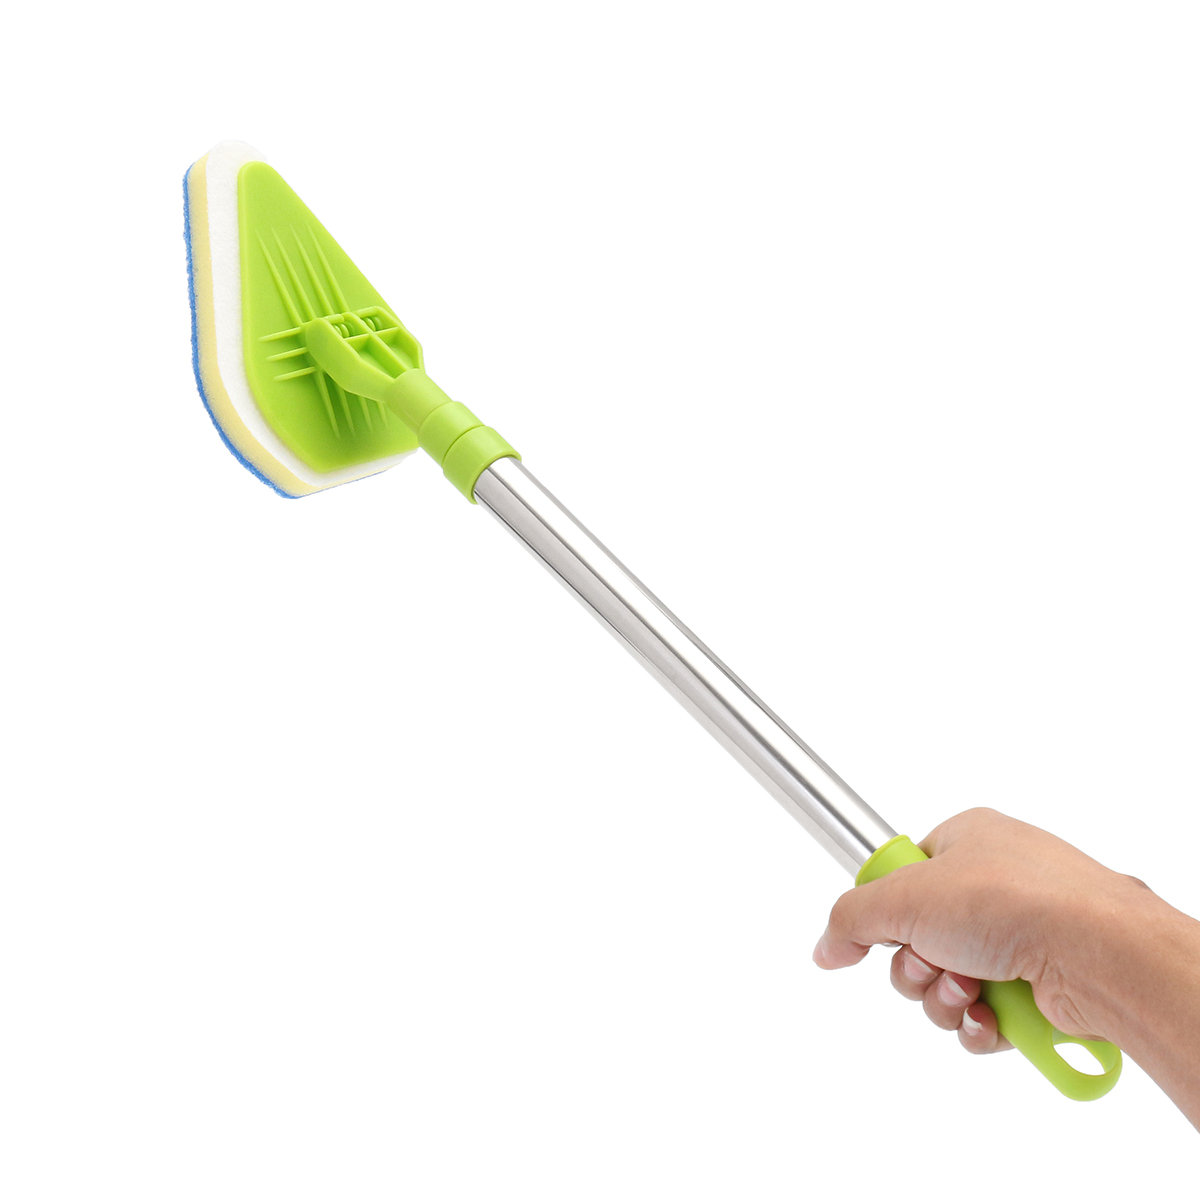 Length-and-Angel-Adjustable-Kitchen-Cleaning-Brushes-Quick-Installation-Multi-brush-Scrubber-Cleaner-1369842-9